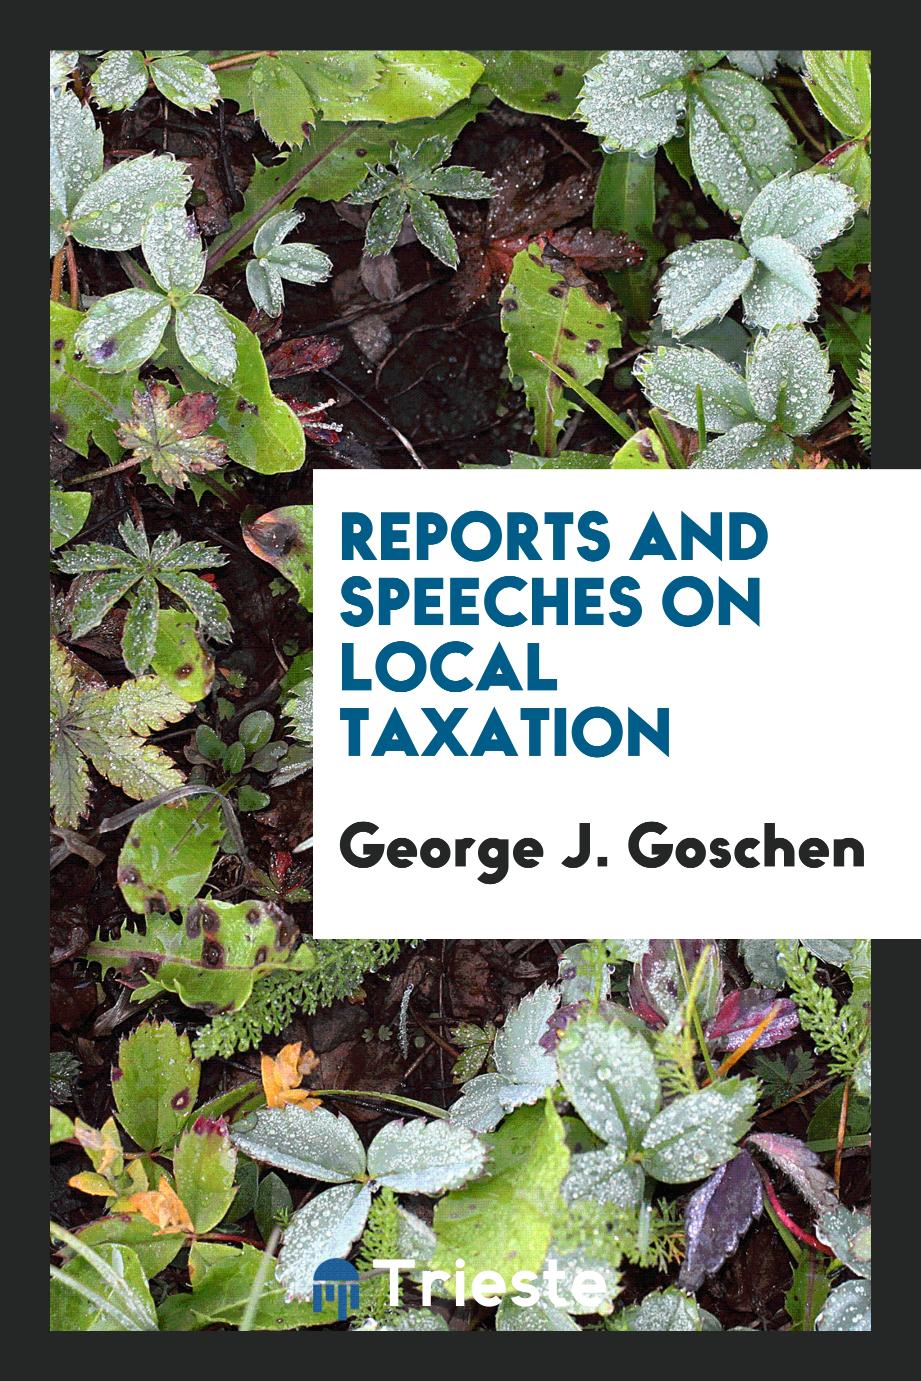 Reports and speeches on local taxation